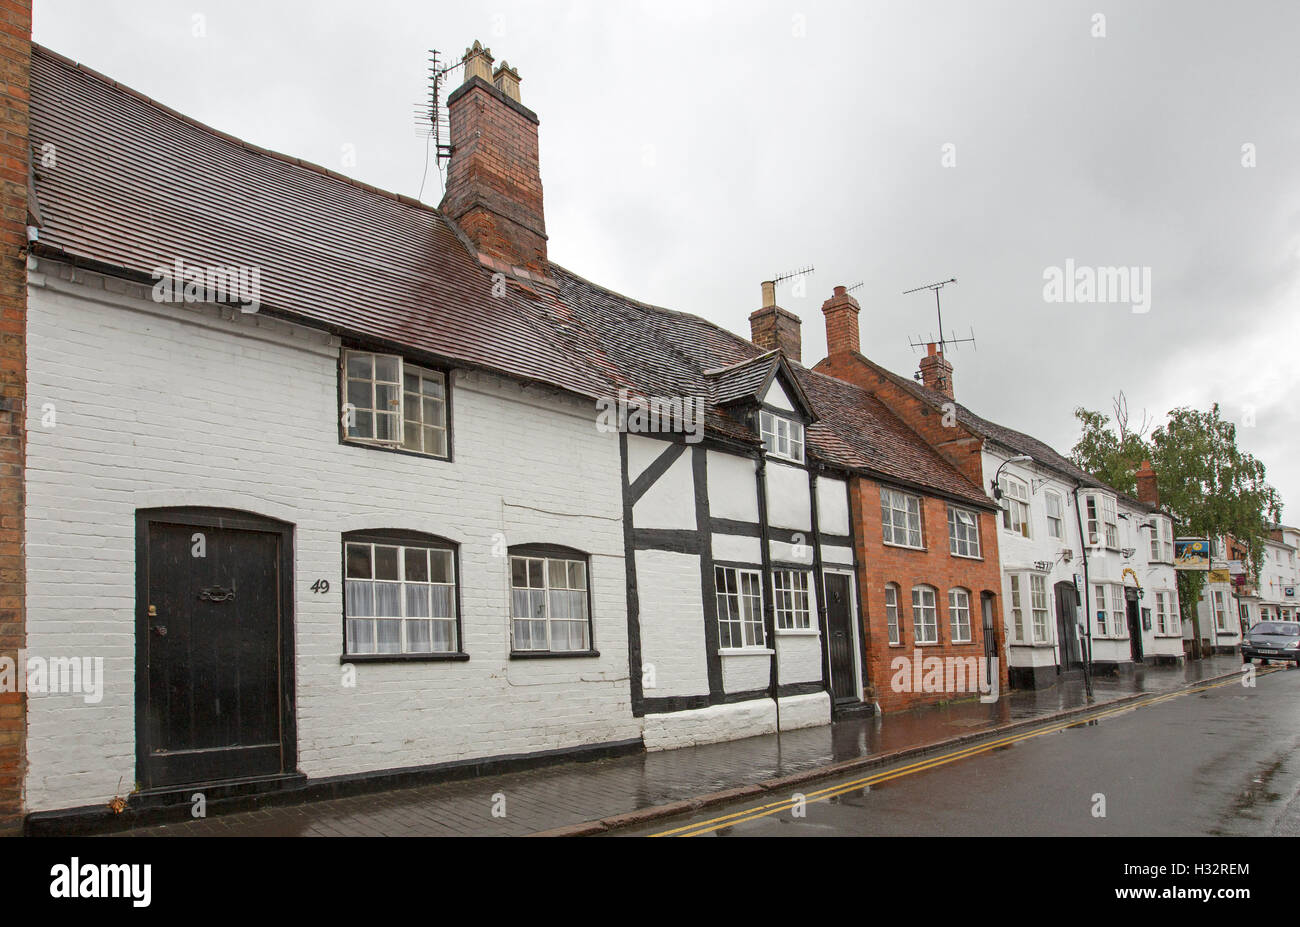 Row of historic black and white medieval buildings beside more modern red brick building in Stratford-upon-Avon, England Stock Photo